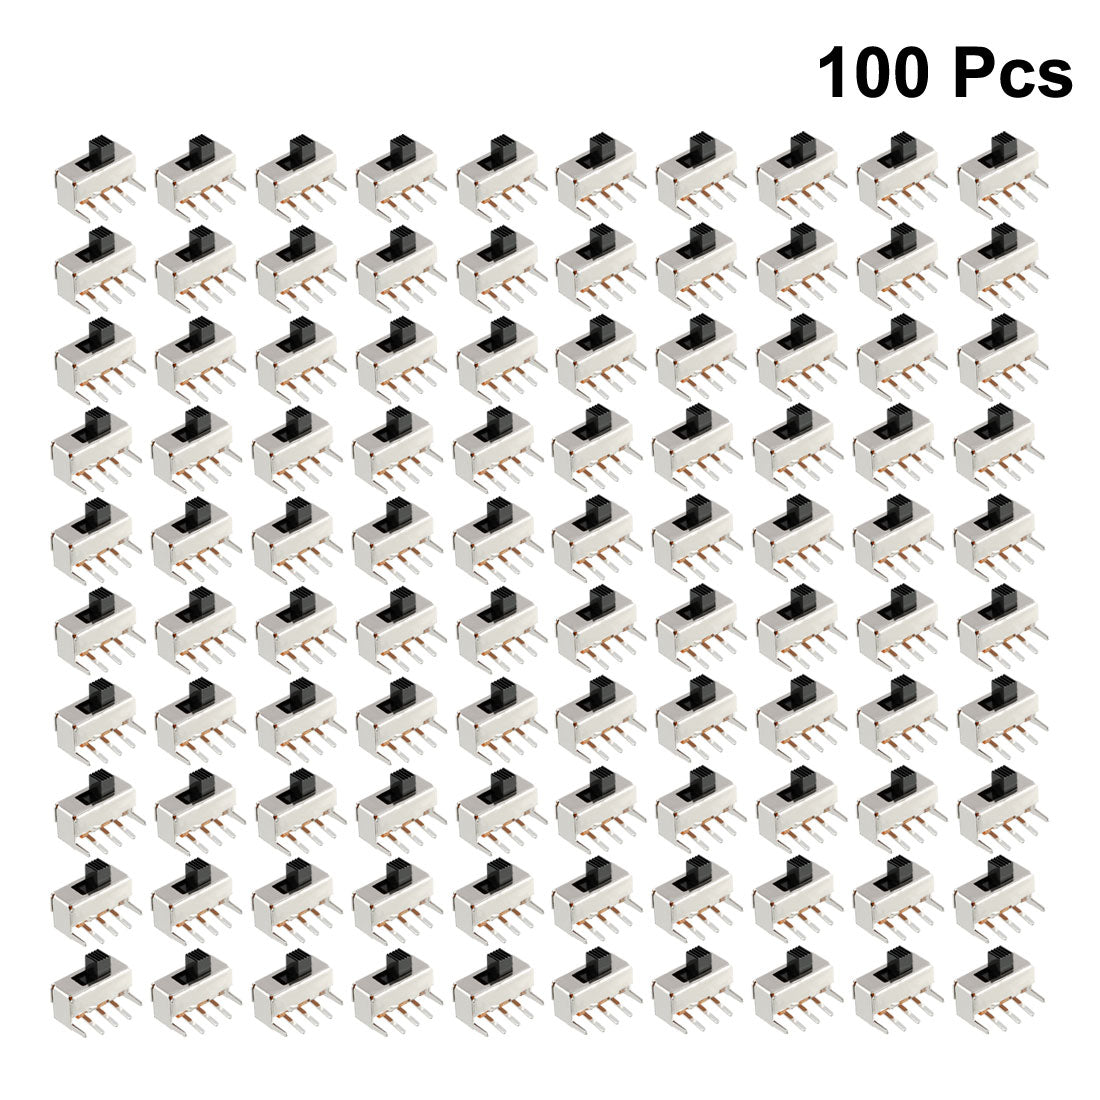 uxcell Uxcell 100Pcs 5mm Horizontal Slide Switch SPDT 1P2T 3 Pins PCB Panel Latching